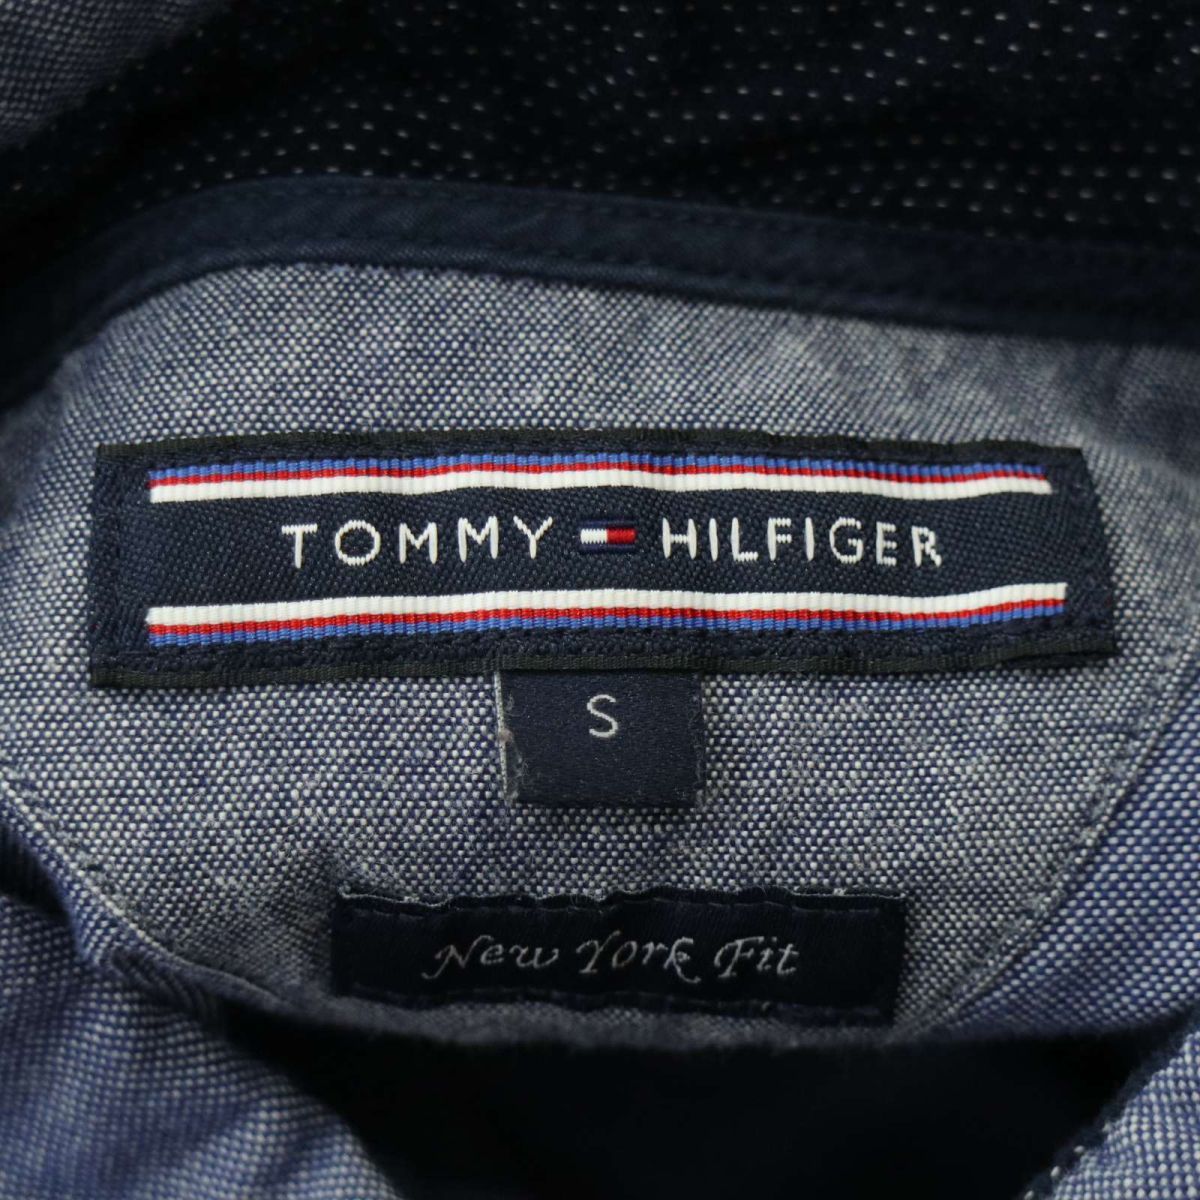 TOMMY HILFIGER トミーヒルフィガー New York Fit 通年 バード刺繍★ 総柄 長袖 シャツ Sz.S　メンズ　A4T00030_1#C_画像6